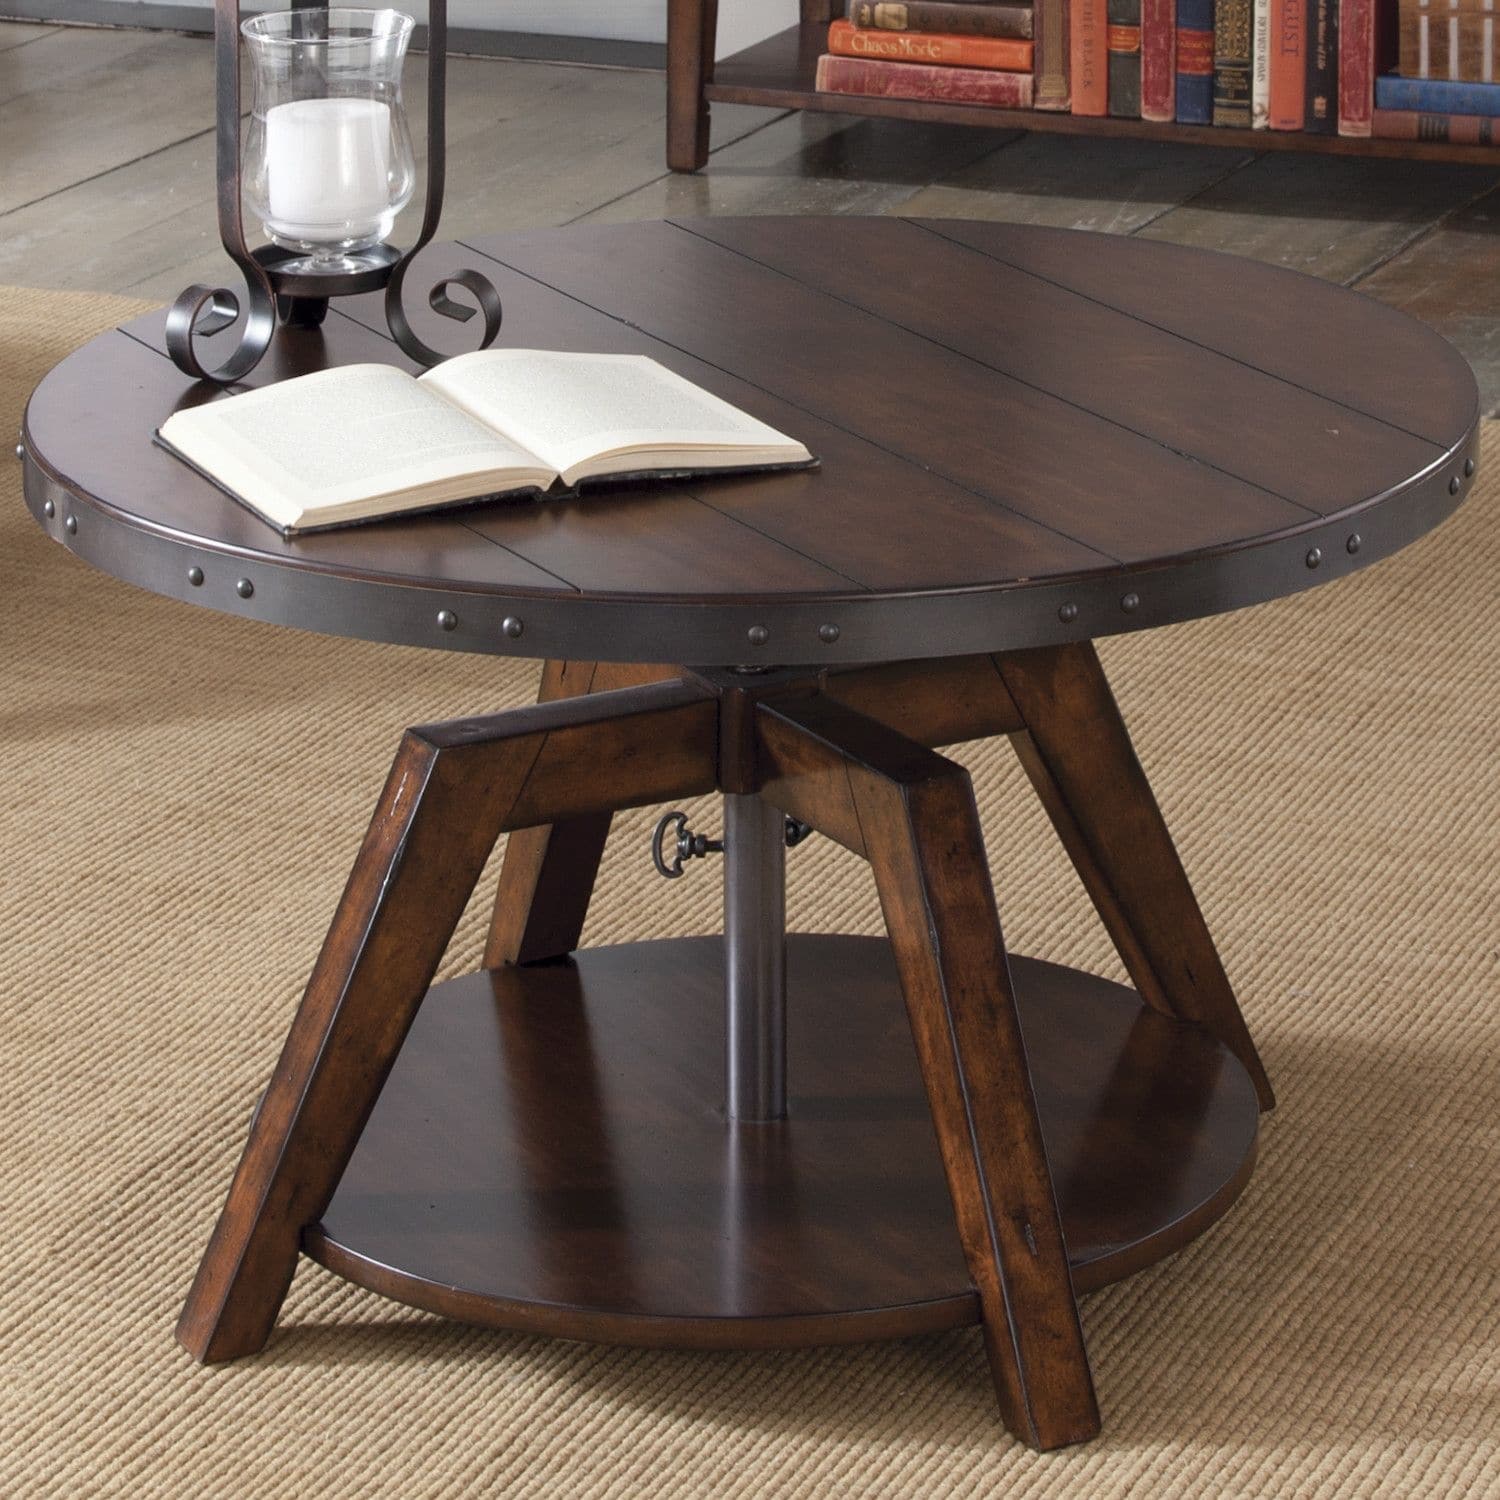 50+ Amazing Convertible Coffee Table to Dining Table